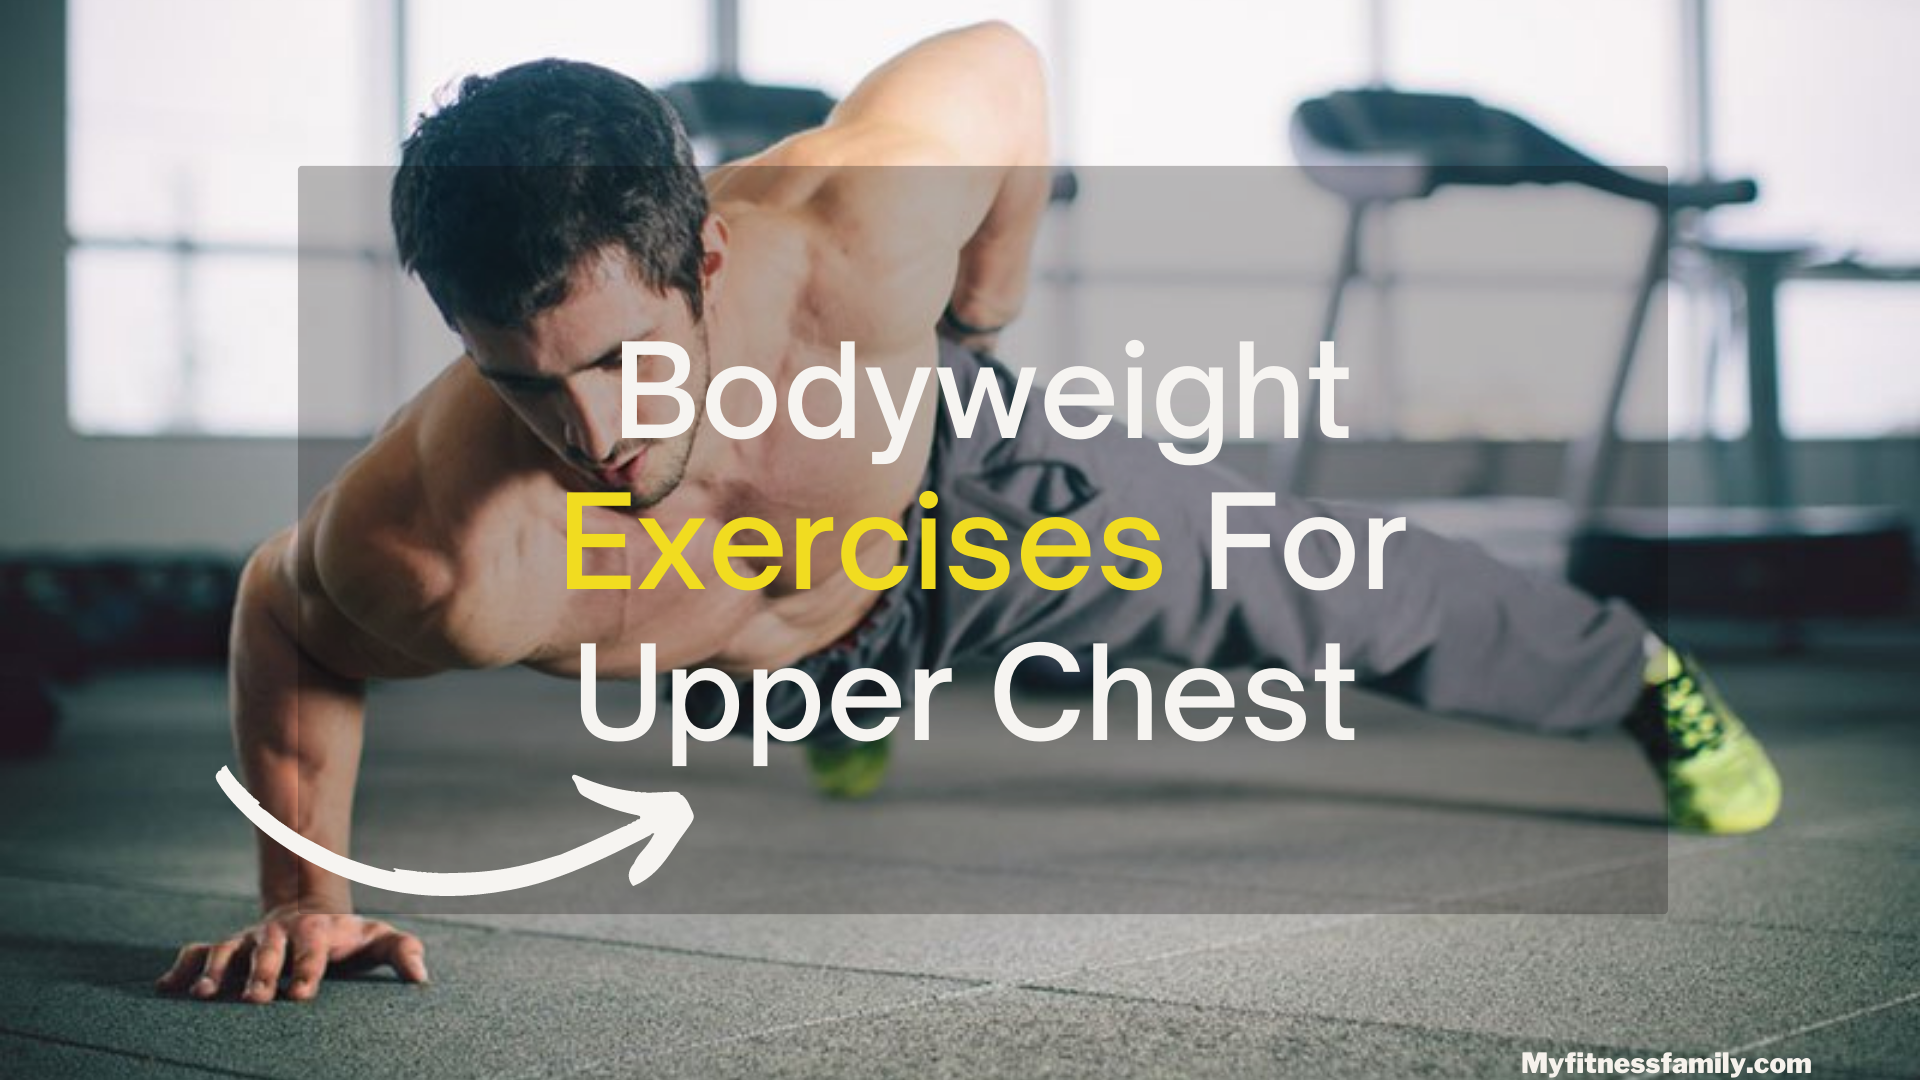 Bodyweight Exercises For Upper Chest: The 9 Best Exercises